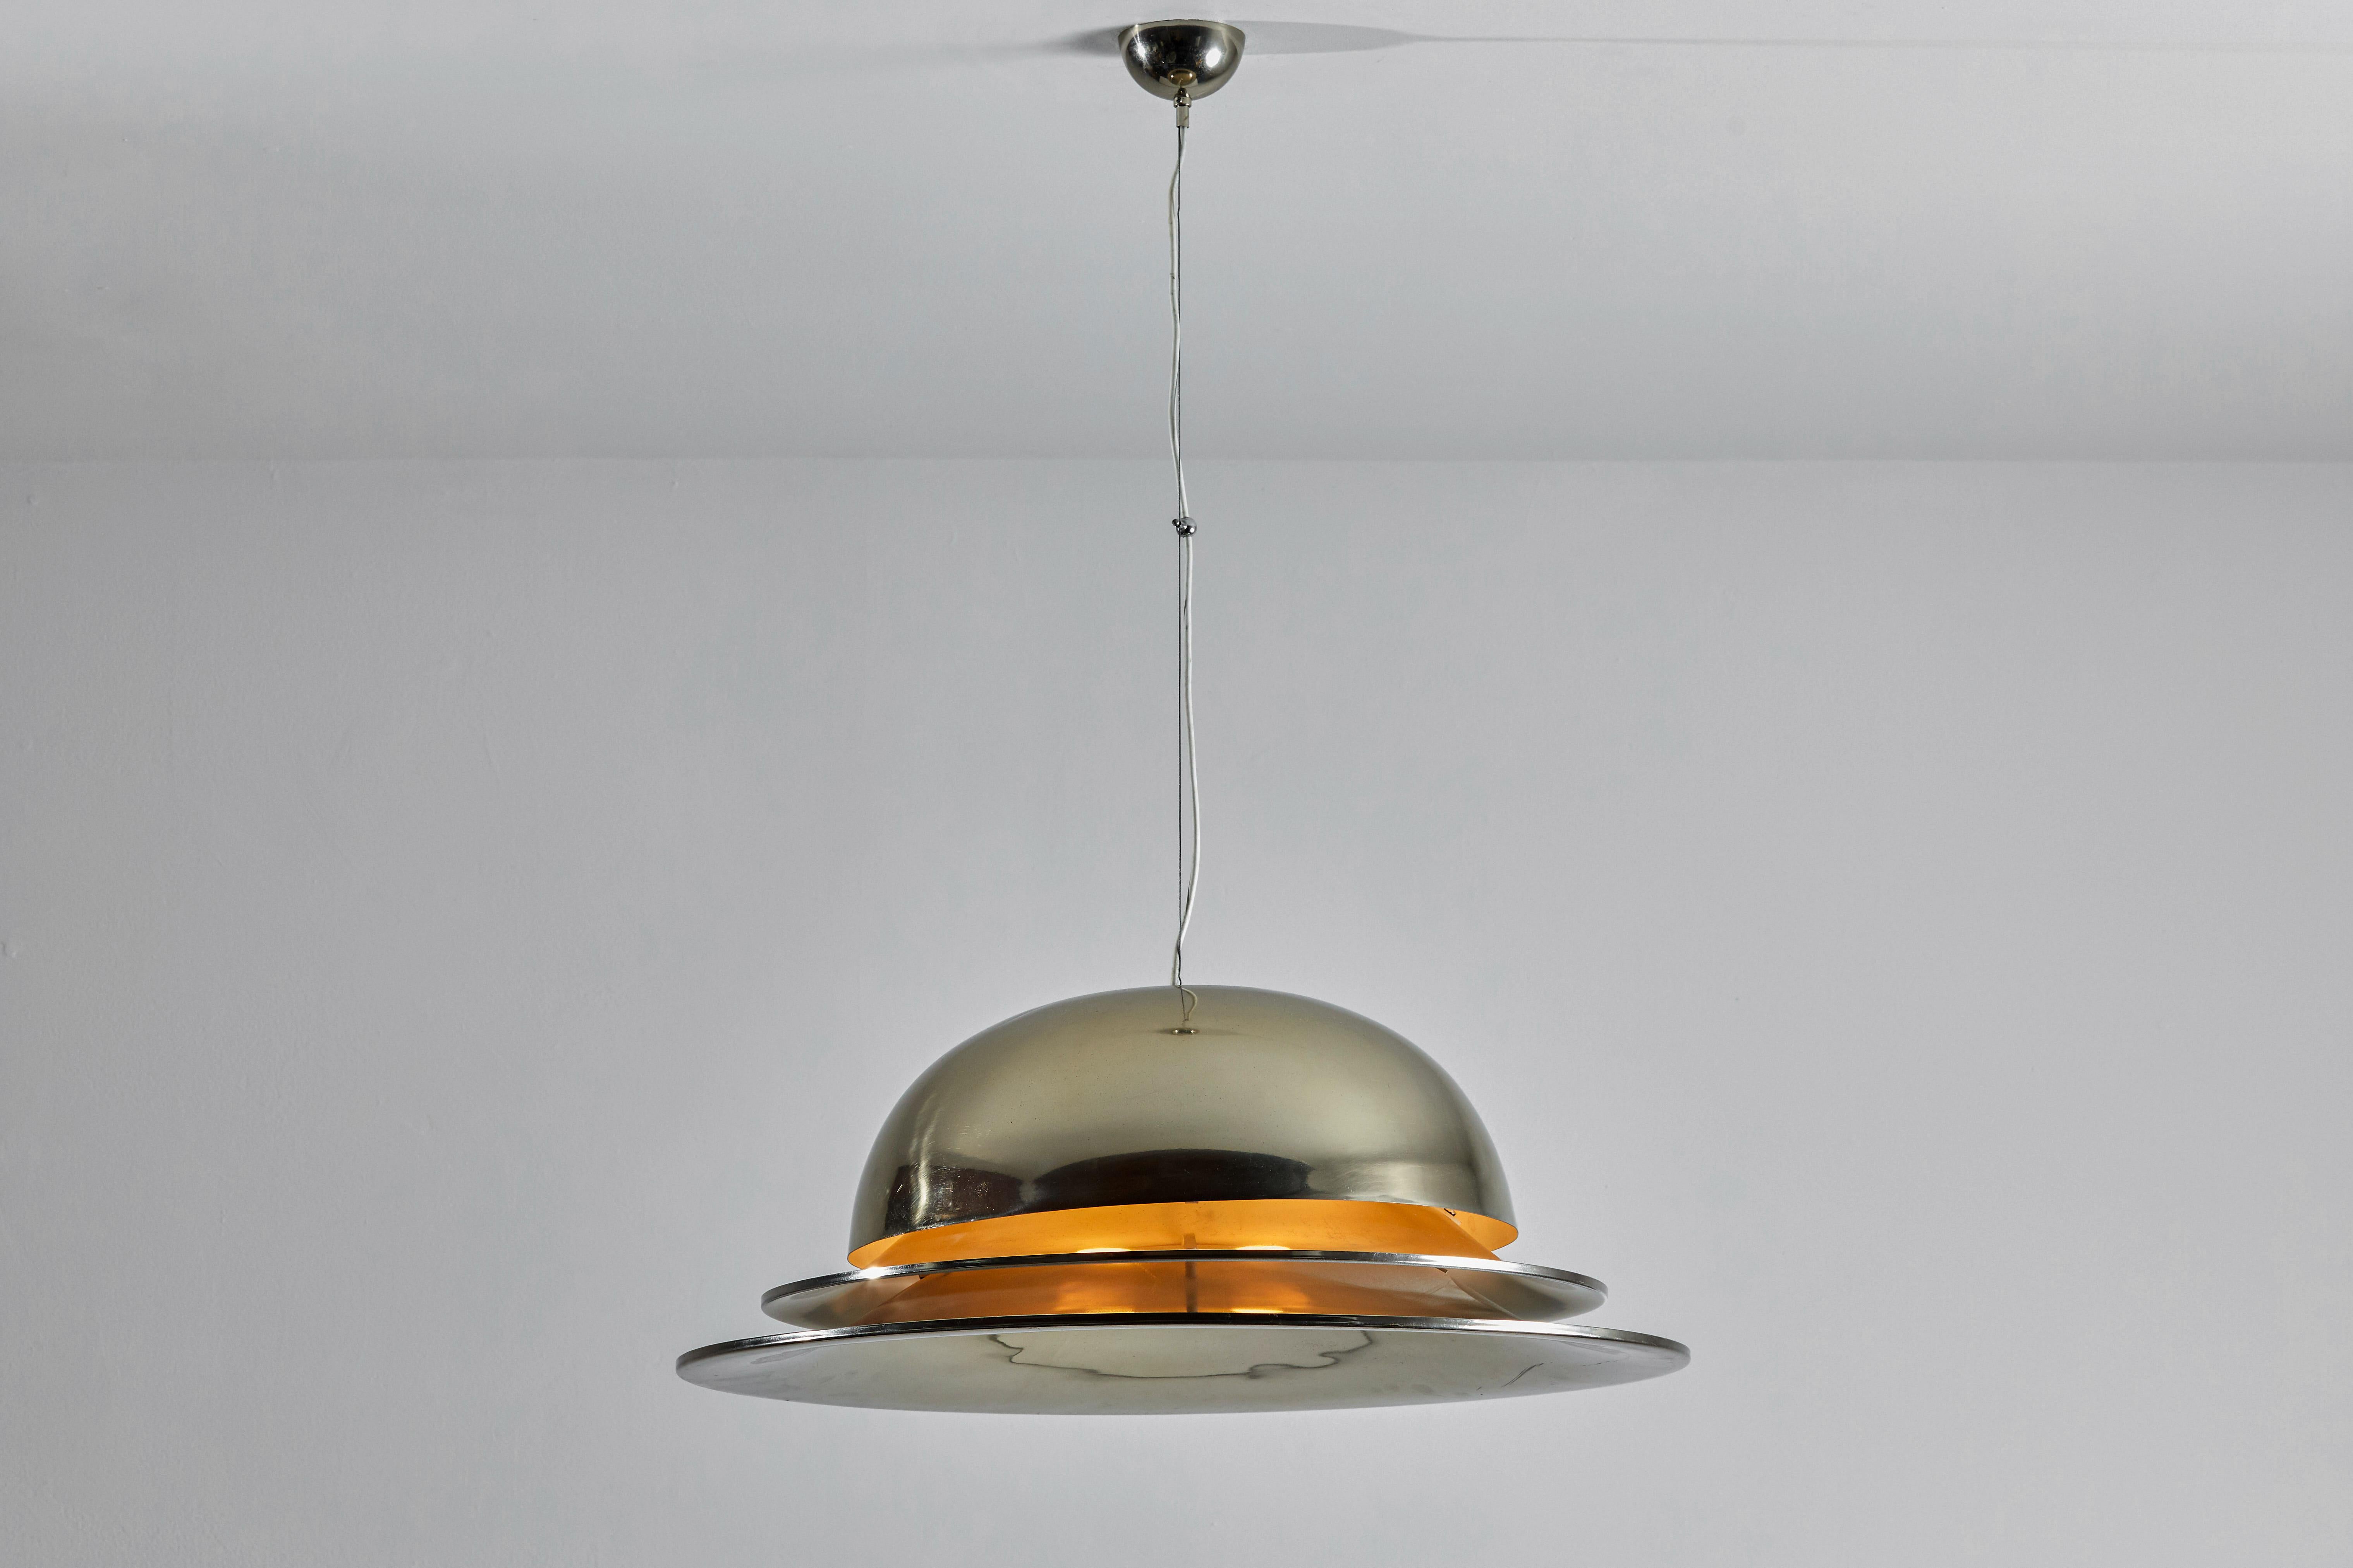 Lanzichenecchi suspension light by Gianemilio Piero and Anna Monti for Fontana Arte. Designed and manufactured in Italy, 1967. Nickel plated brass, satin glass diffuser. Rewired for U.S. junction boxes. Takes one E27 75w maximum bulb. Bulbs provided